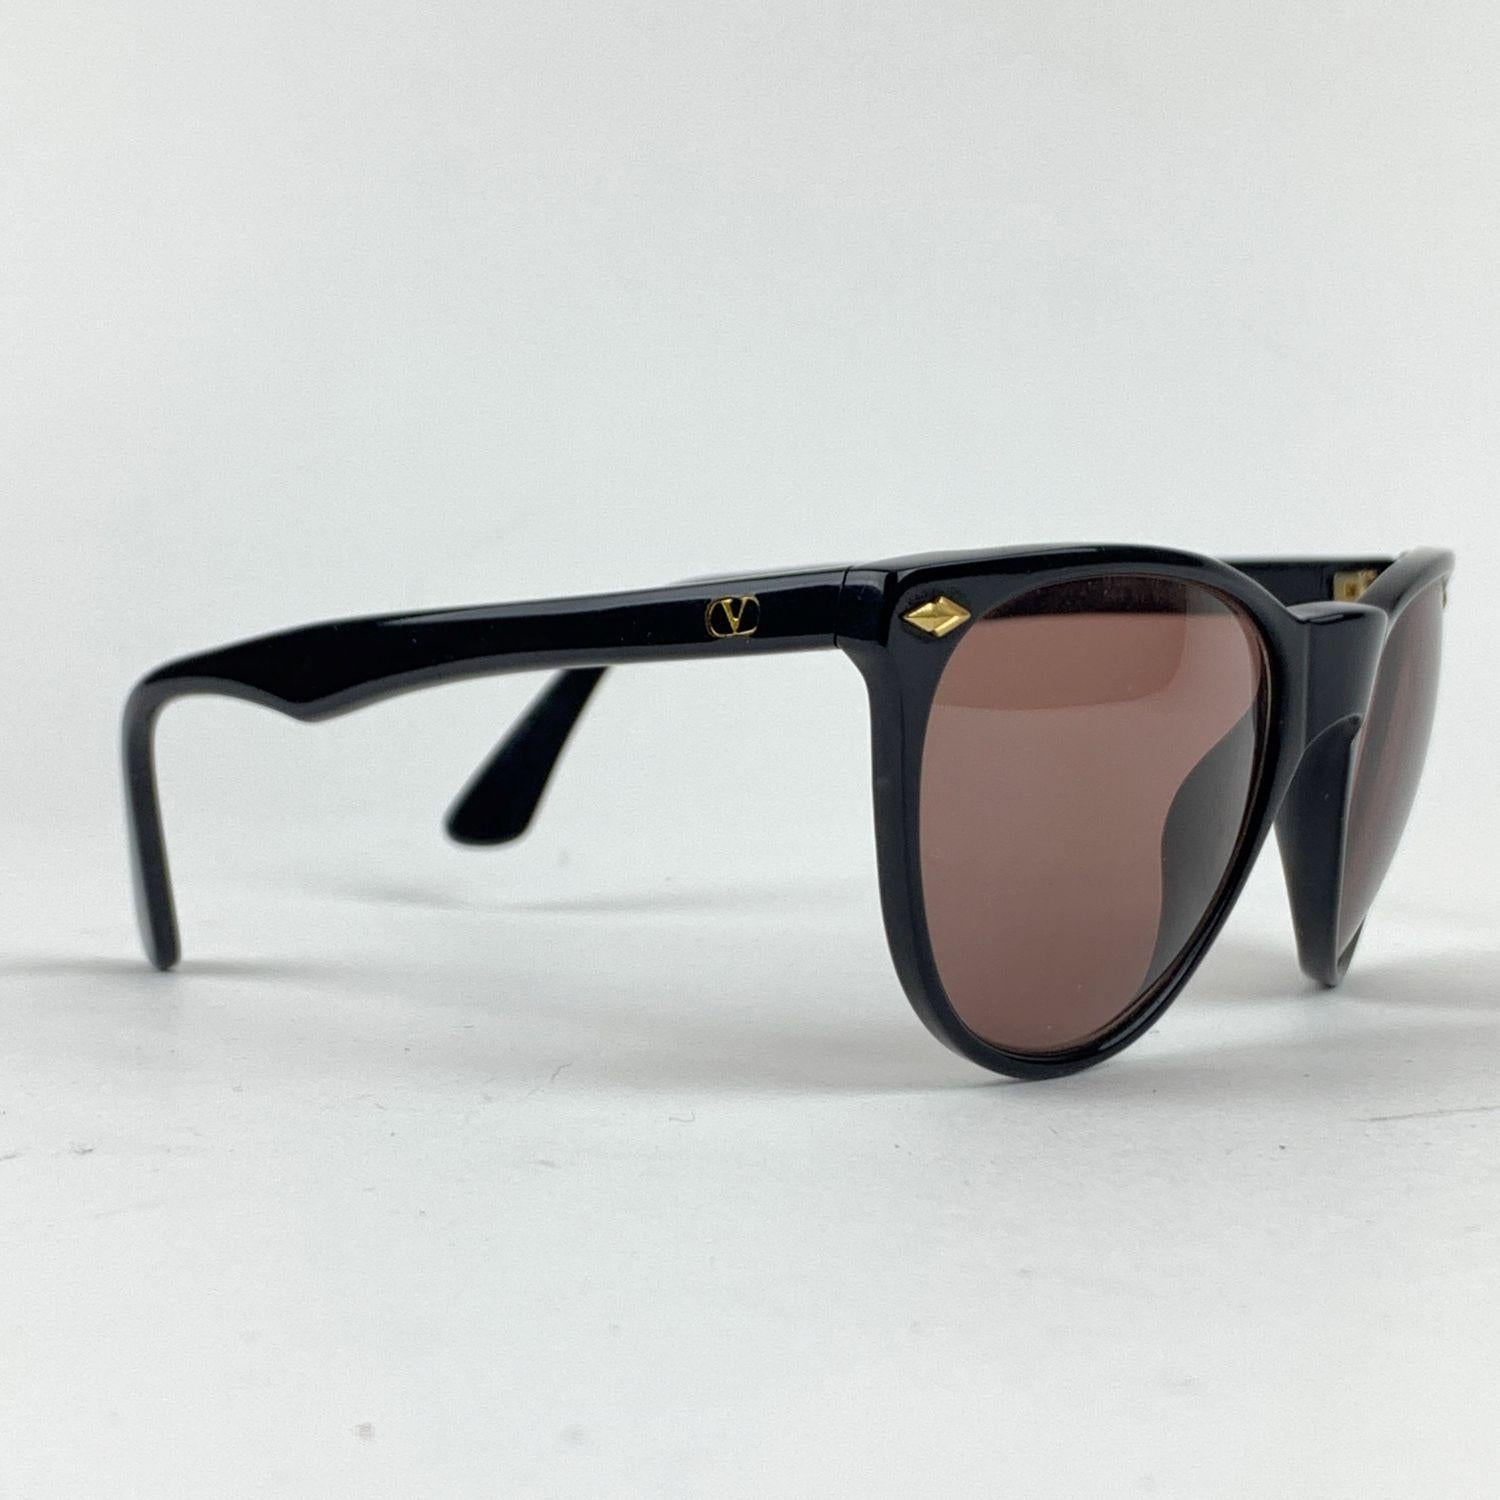 Valentino vintage sunglasses mod. 564. Classic frame in black color. Gold-toned Valentino logo on temples. Brown lenses. 100% UV protection. Made in Italy.

Details

MATERIAL: Acetate

COLOR: Black

MODEL: 564 - 51

GENDER: Women

COUNTRY OF